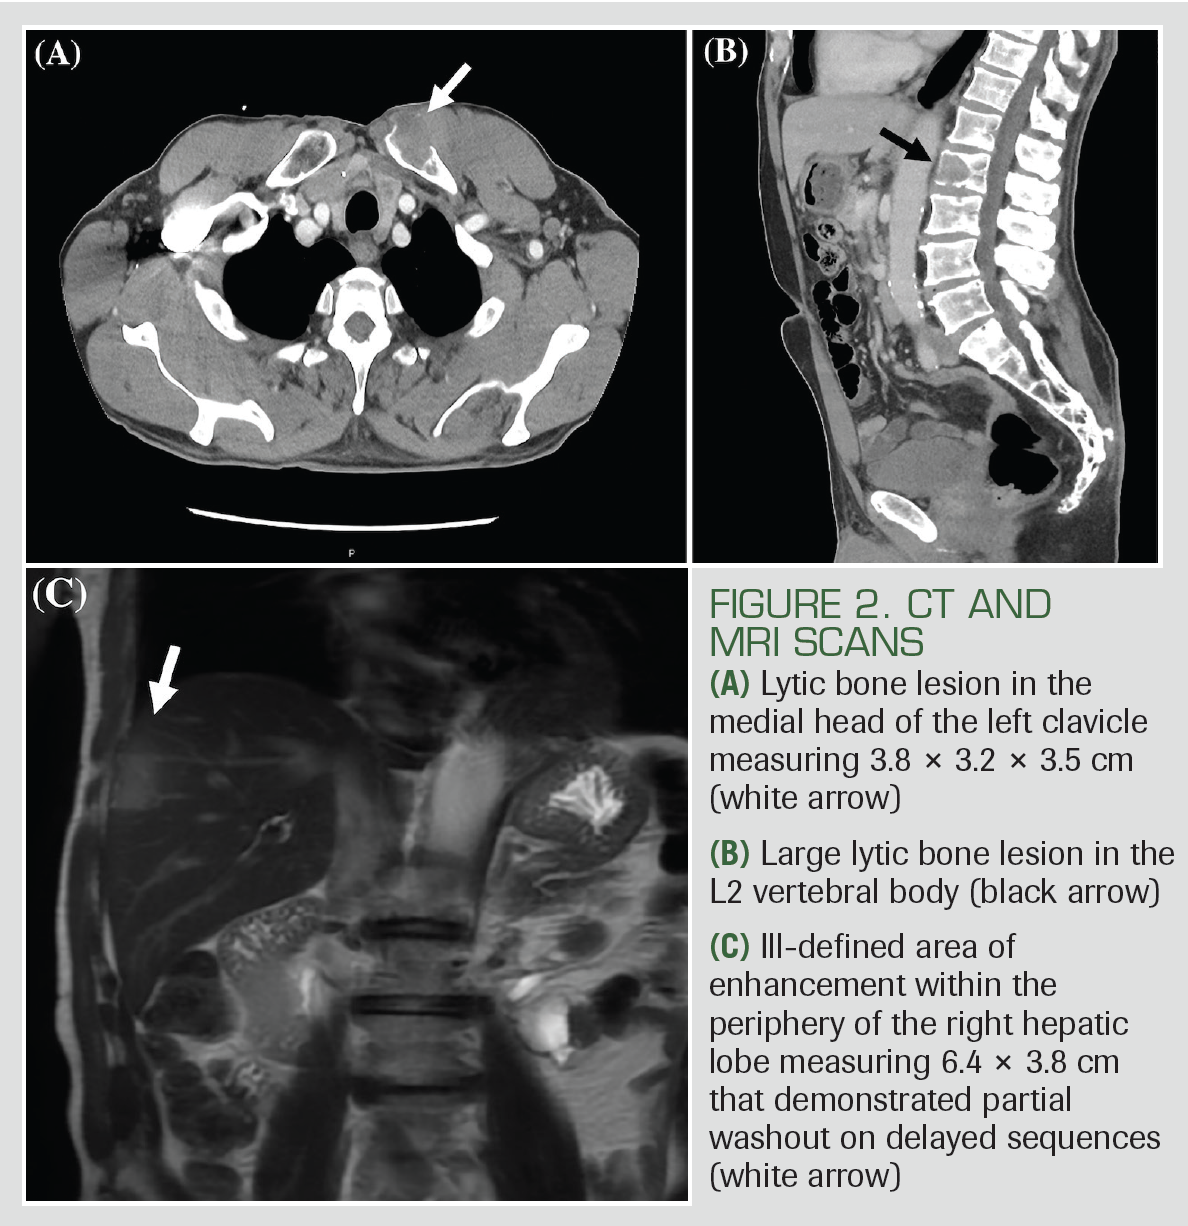 FIGURE 2. CT AND MRI SCANS